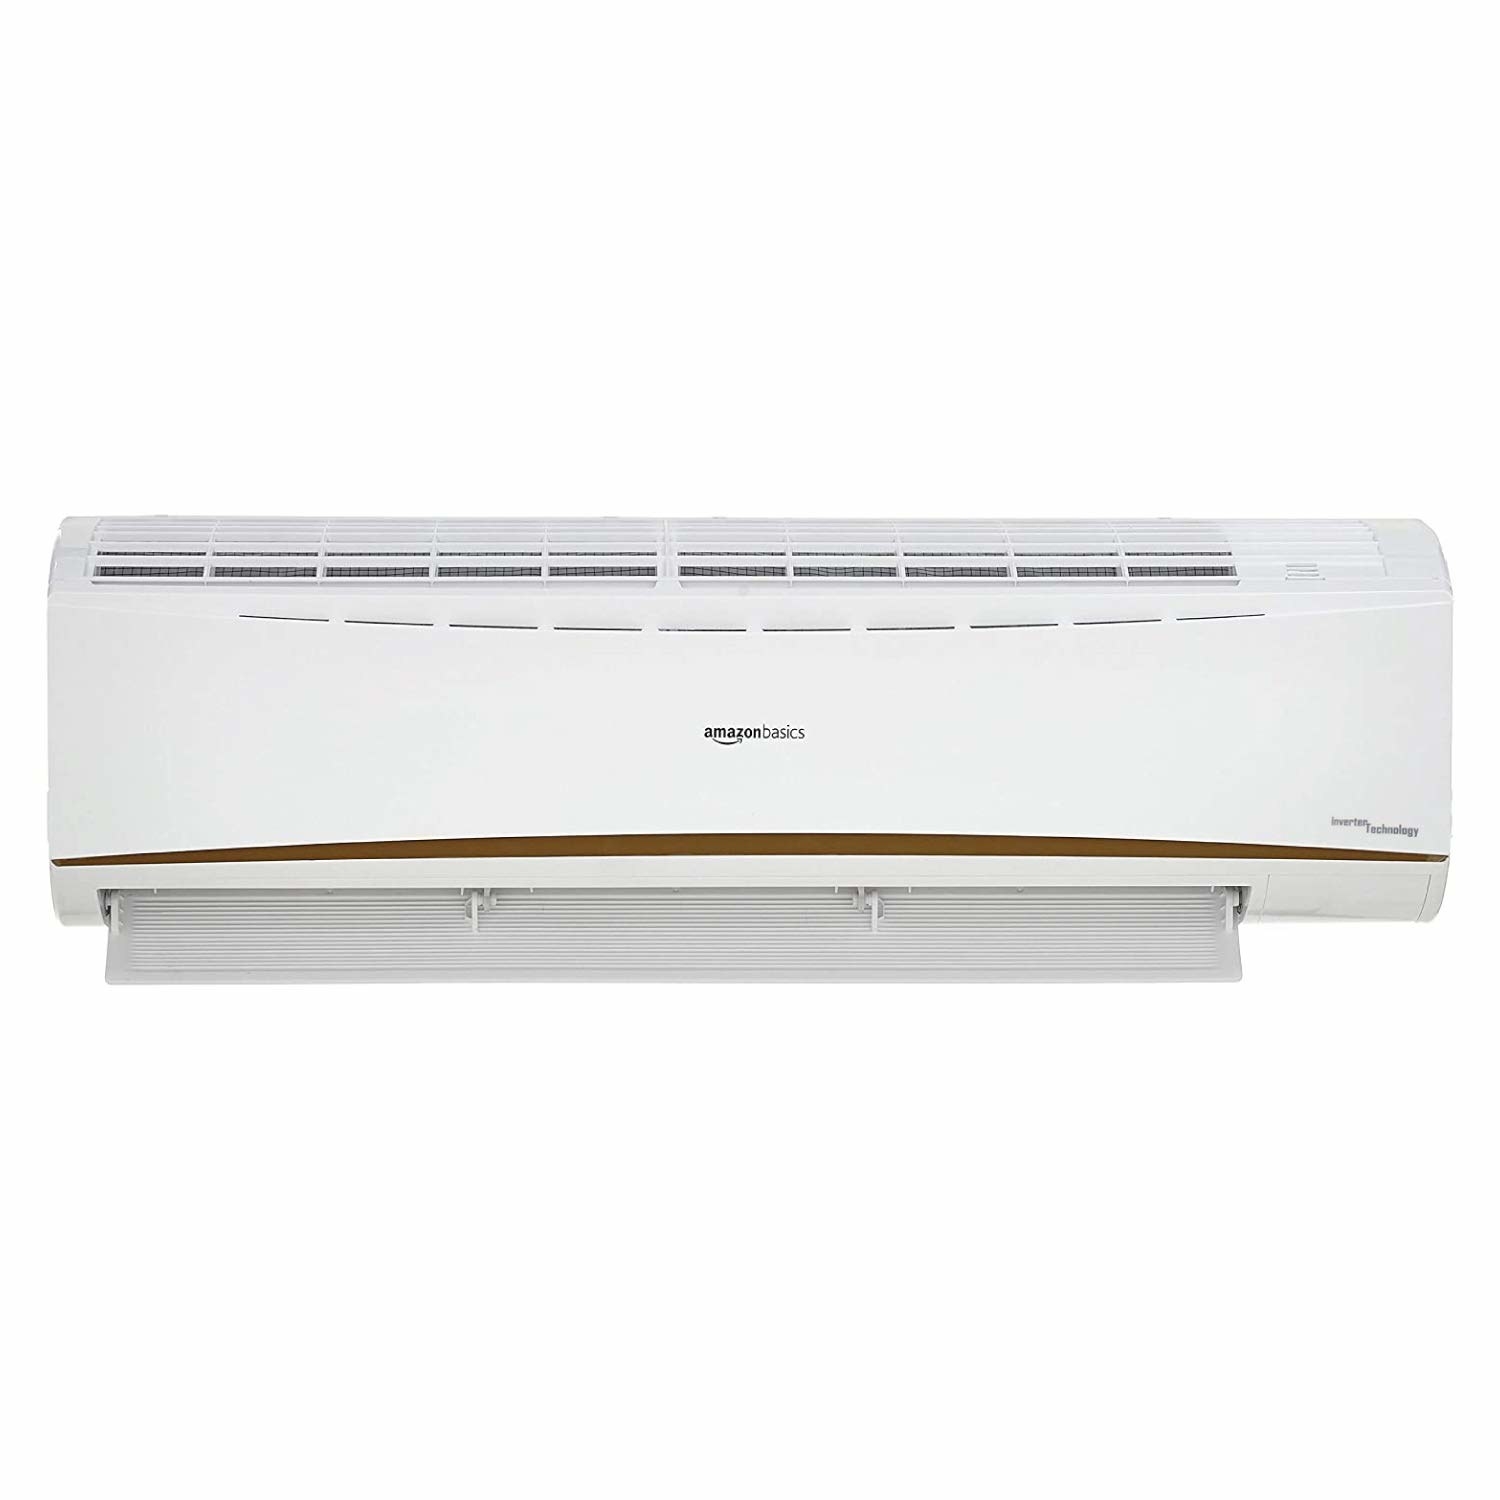 A white air conditioner 